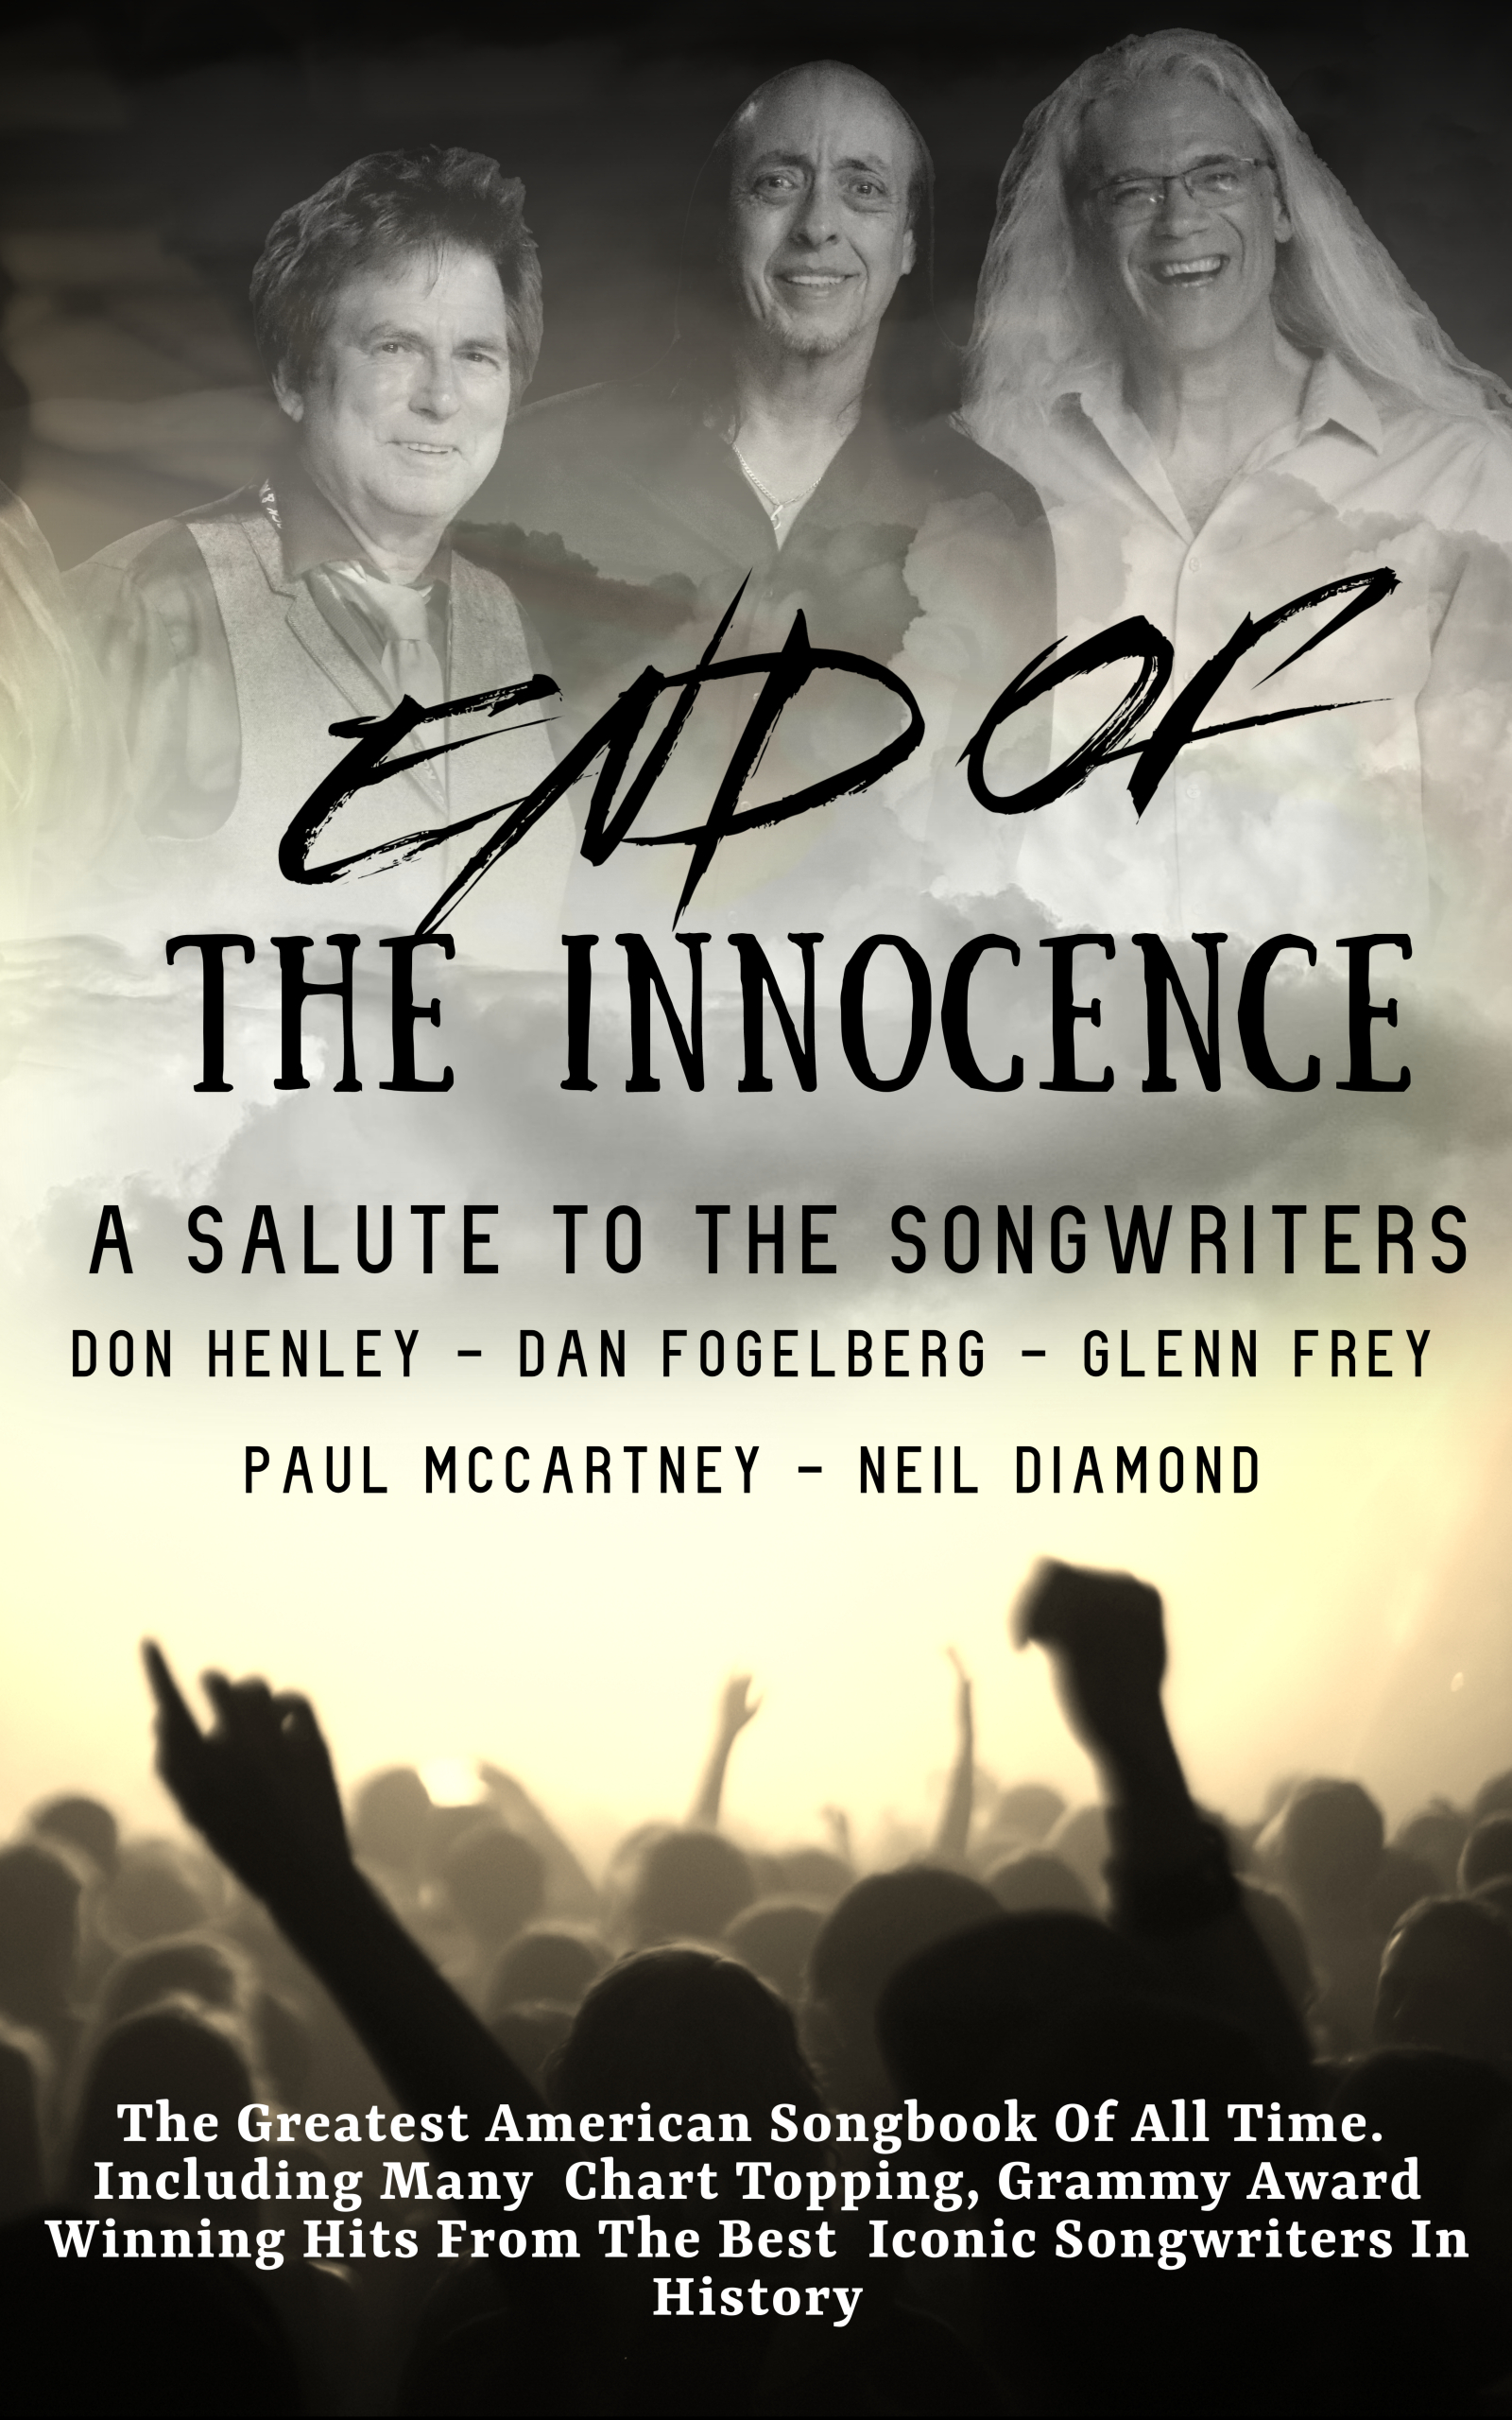 The End Of The Innocence - A Salute To The Songwriters @ Black Box